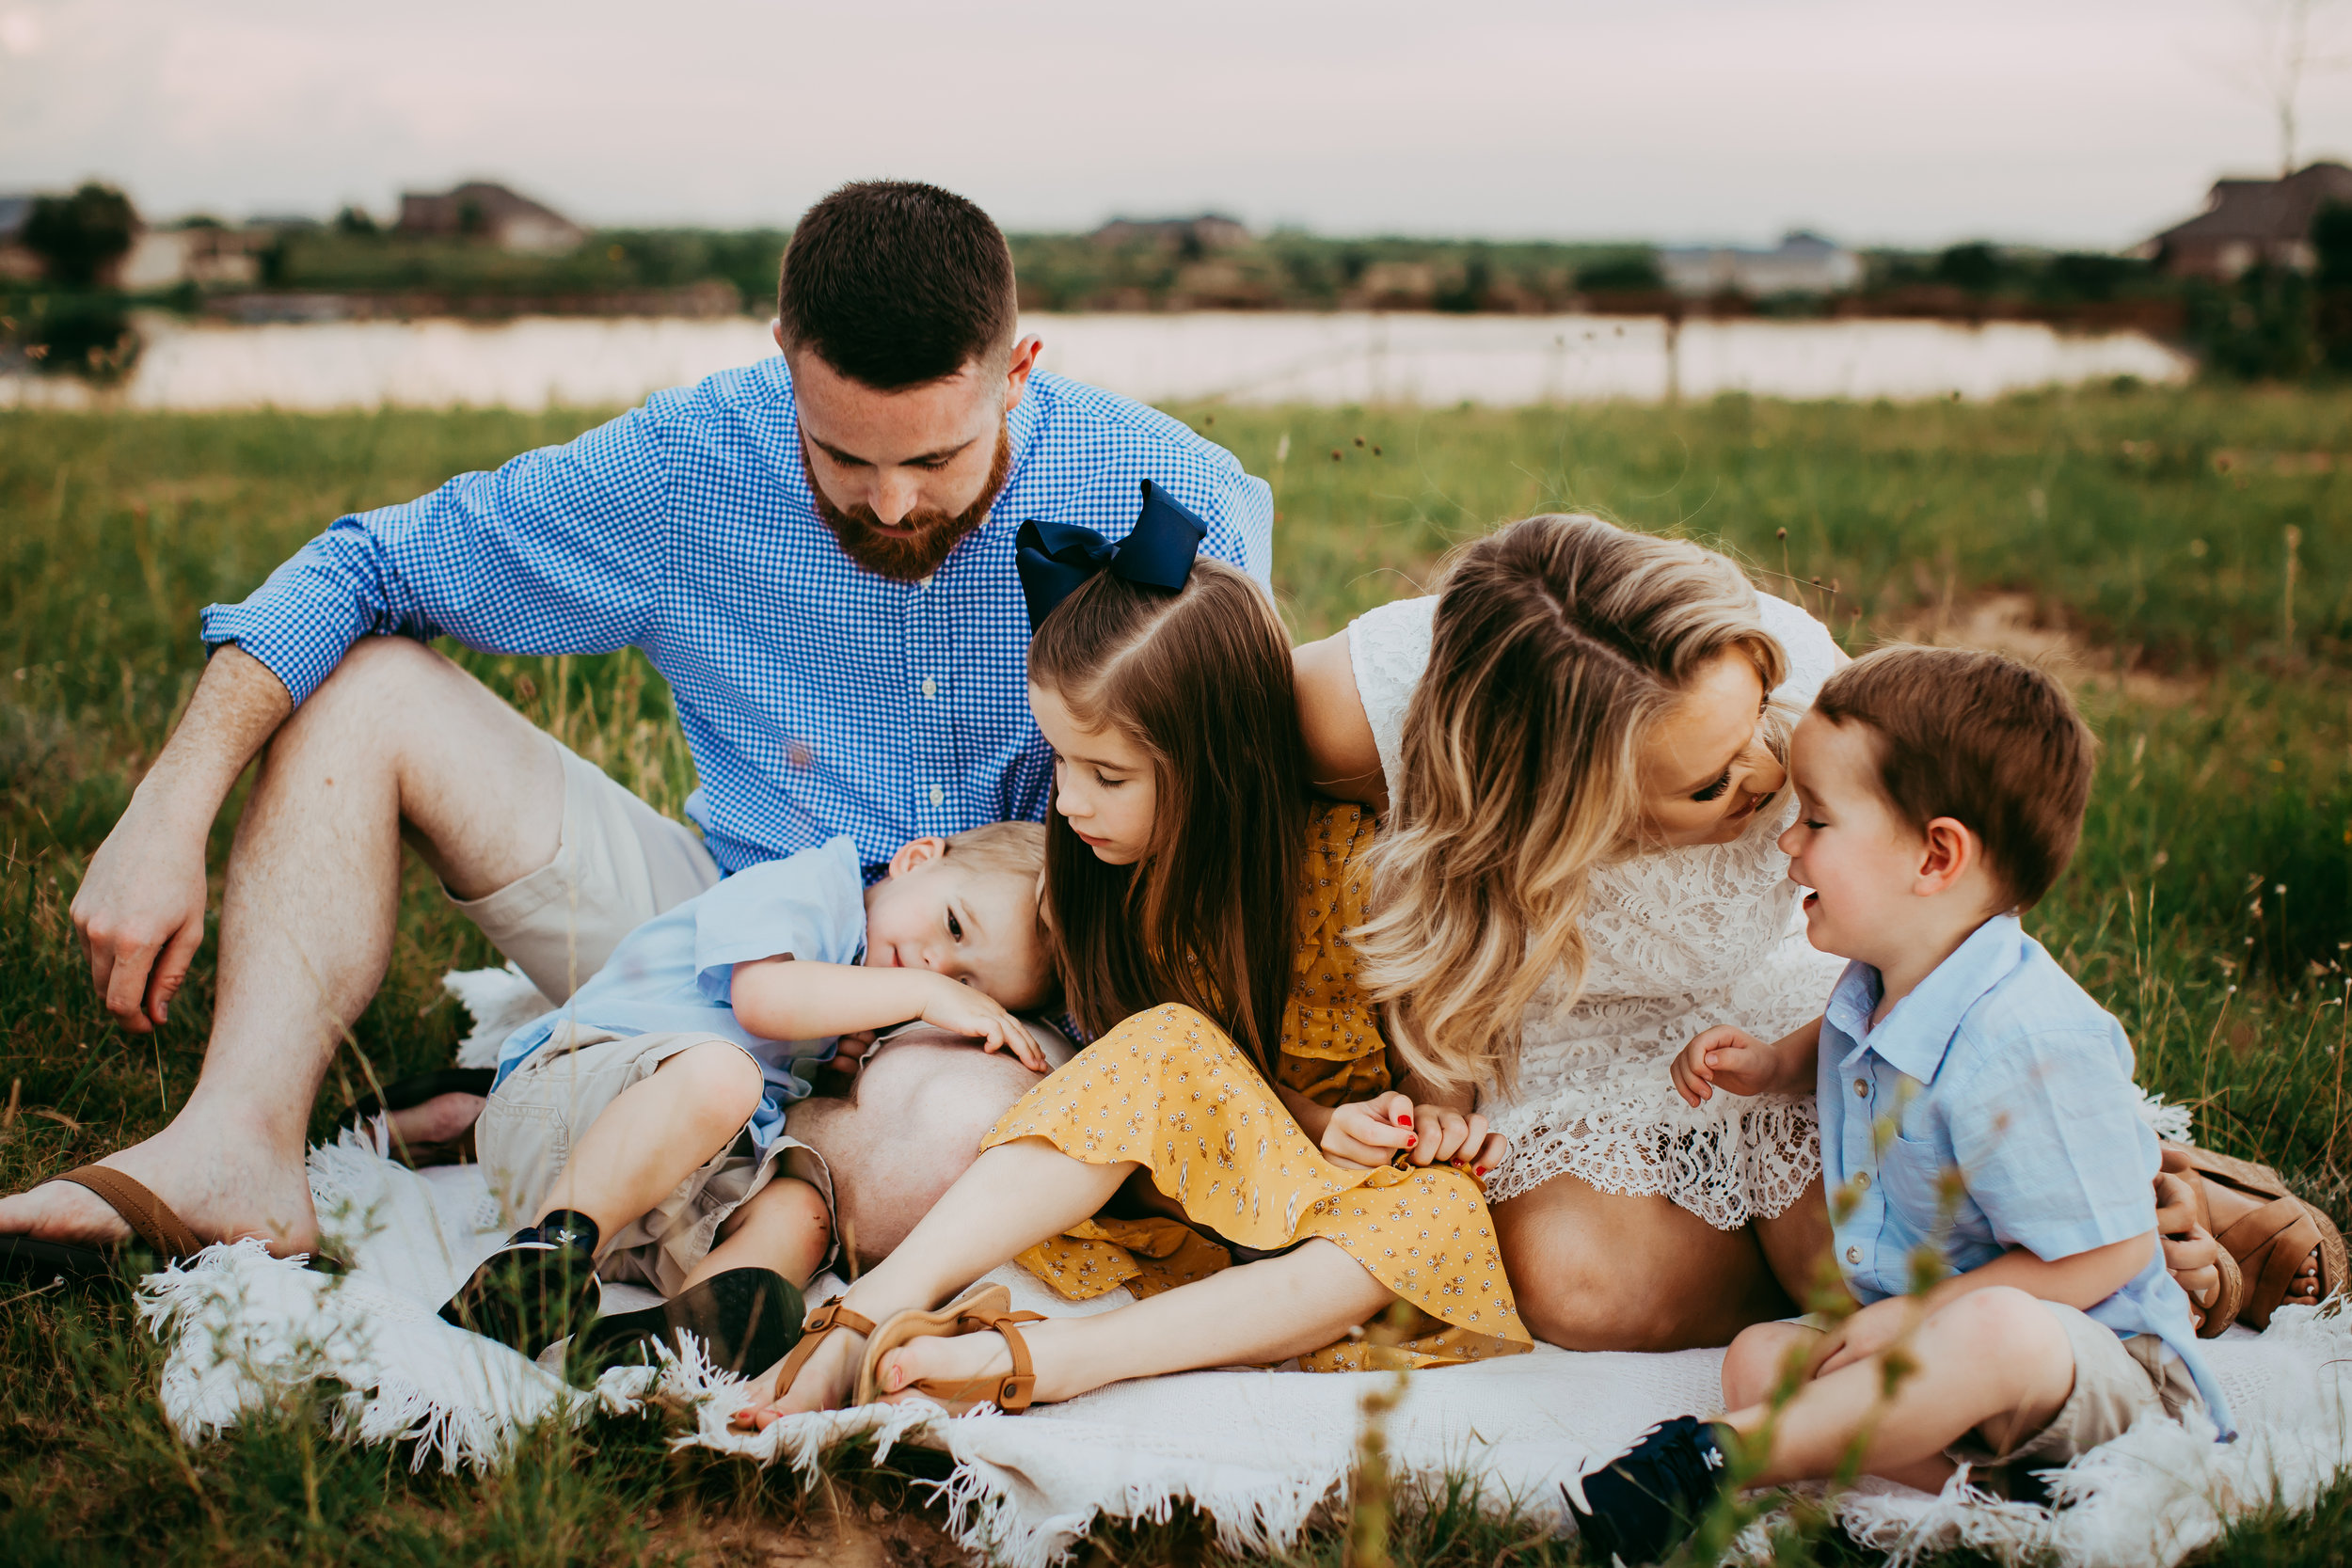  Family of five sitting all together and interacting on picnic blanket #tealawardphotography #texasfamilyphotographer #amarillophotographer #amarillofamilyphotographer #lifestylephotography #emotionalphotography #familyphotosoot #family #lovingsiblings #purejoy #familyphotos #familyphotographer #greatoutdoors #naturalfamilyinteraction 